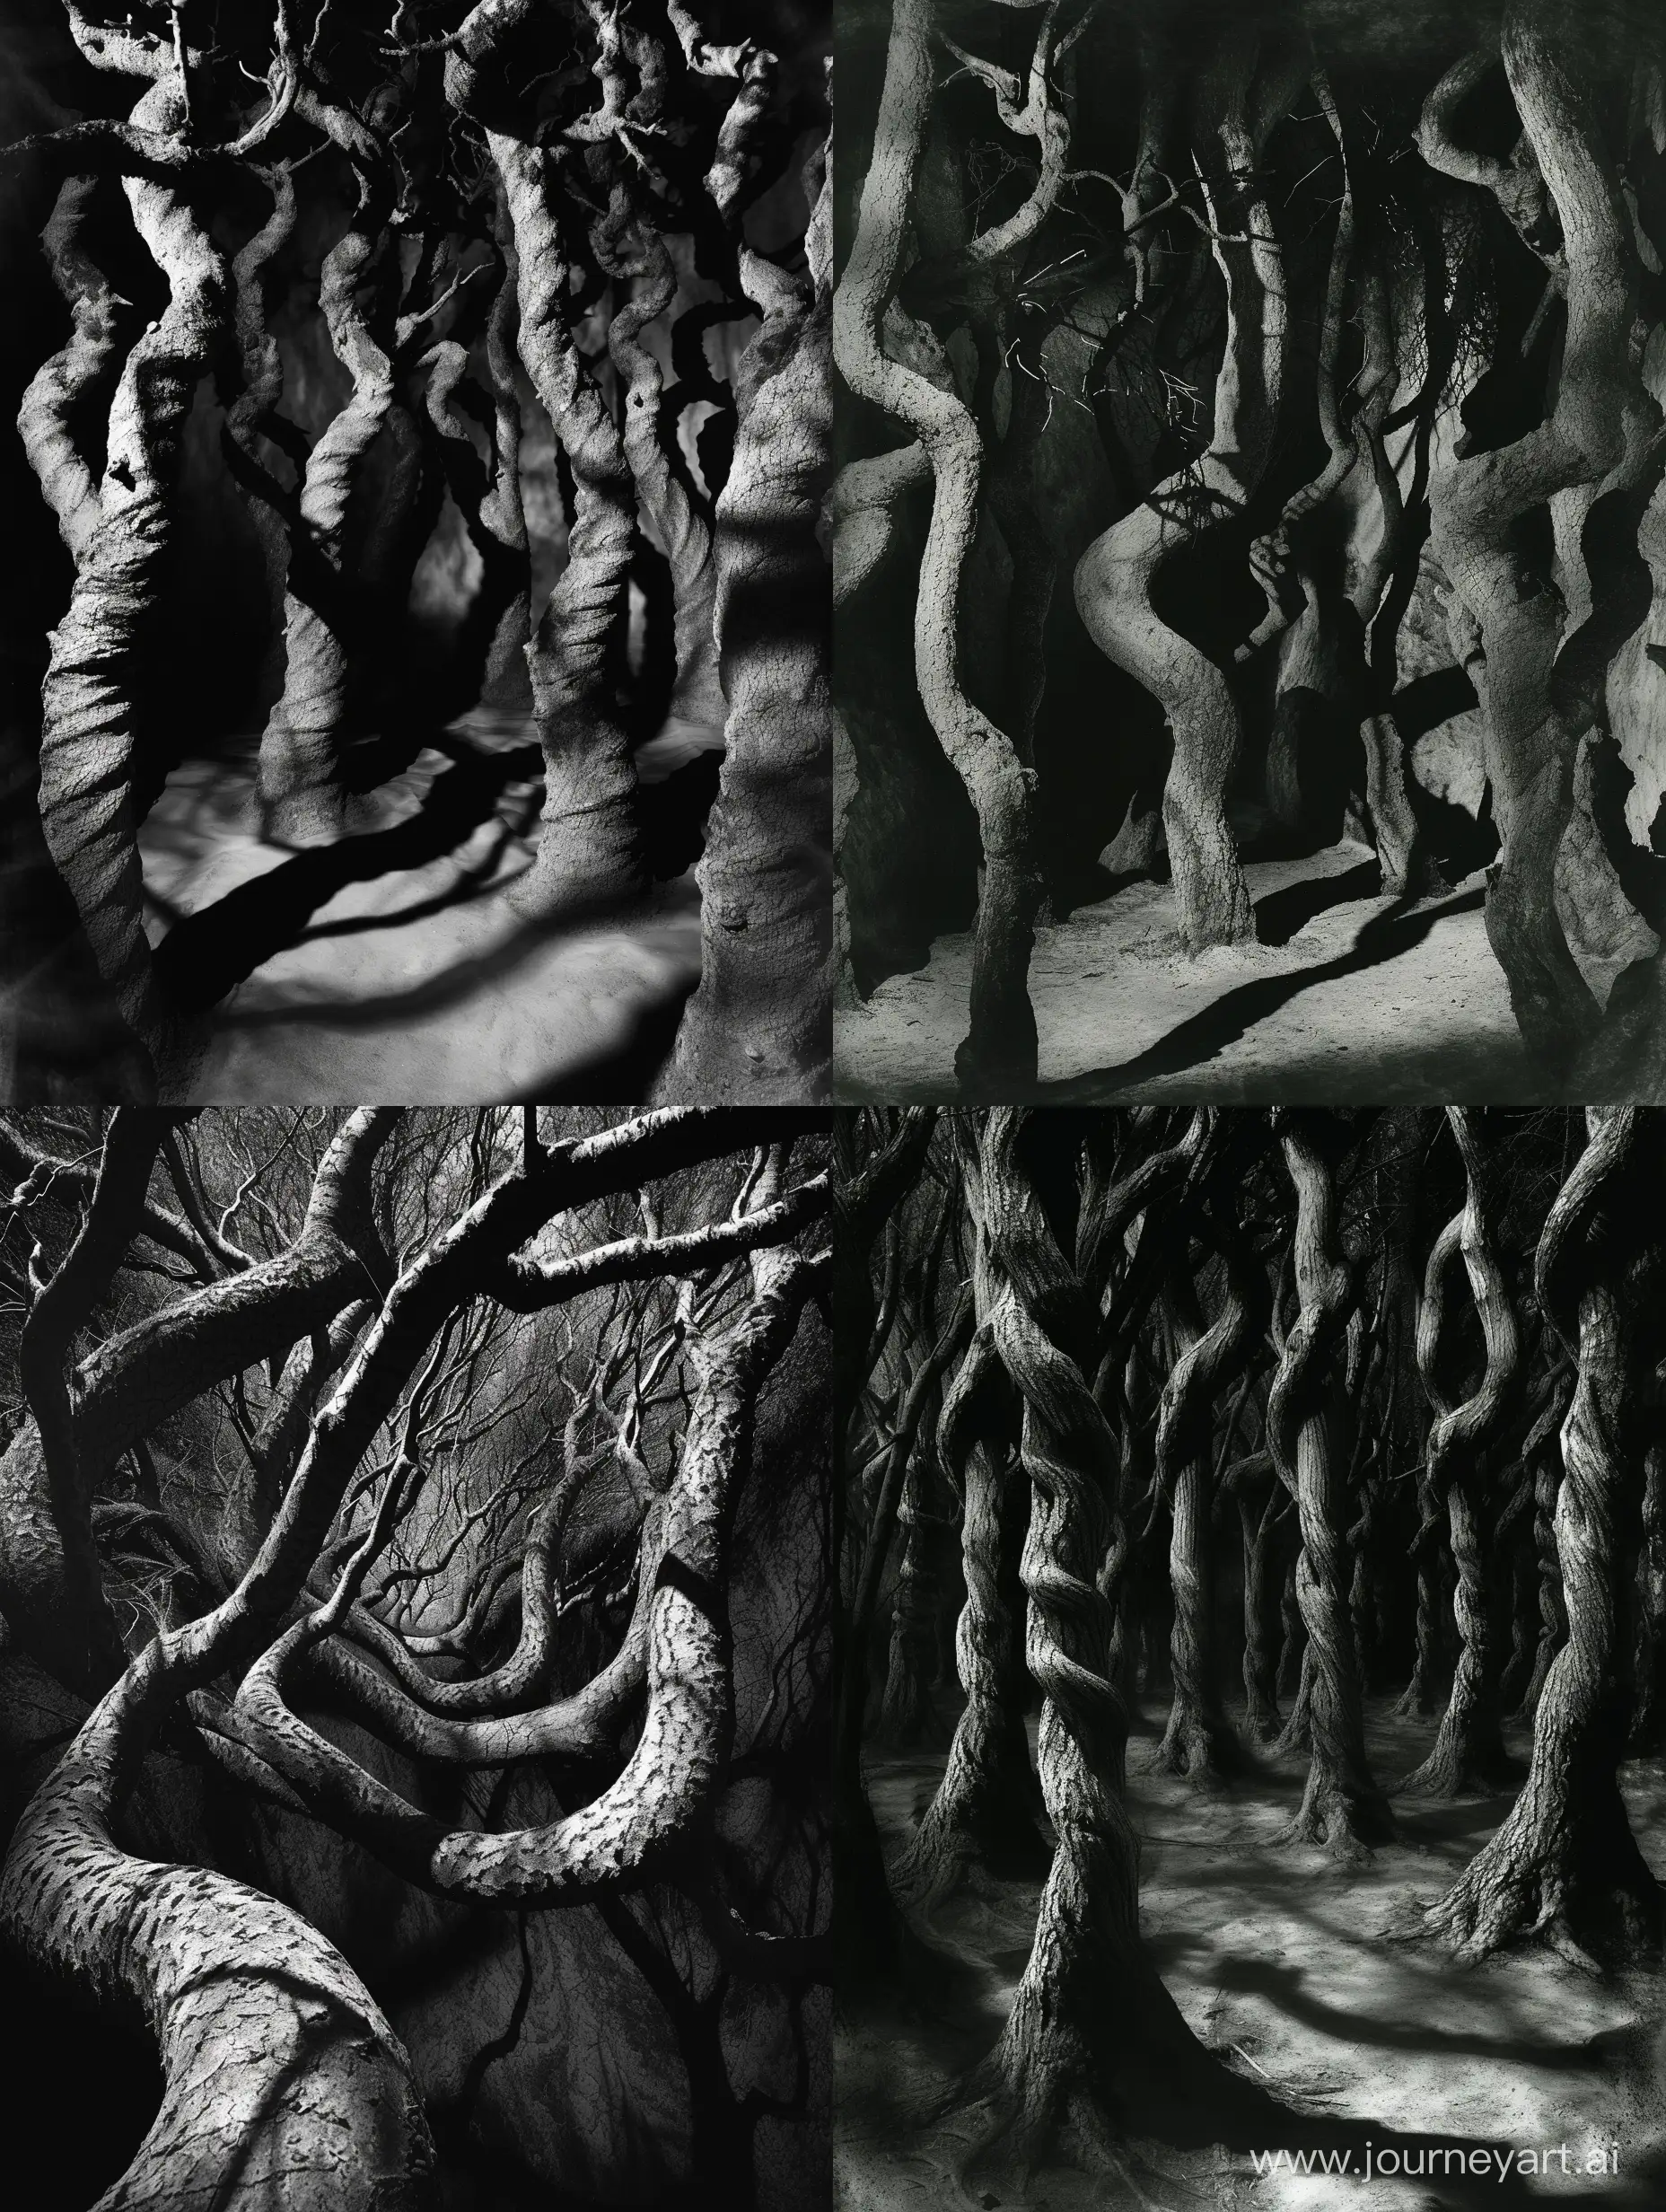 grayscale photo of a dark and foreboding forest, where the trees take on bizarre and distorted forms. Their branches twist and curl in unnatural ways, resembling contorted limbs. Shadows dance and twist, creating an eerie and disorienting play of light and darkness. The composition is fragmented and disjointed, with elements that seem randomly scattered, challenging traditional notions of structure and order. The fusion of horror and Dadaism in this scene invites the viewer into a world of unsettling beauty and irrationality, where the line between fear and fascination blurs. 